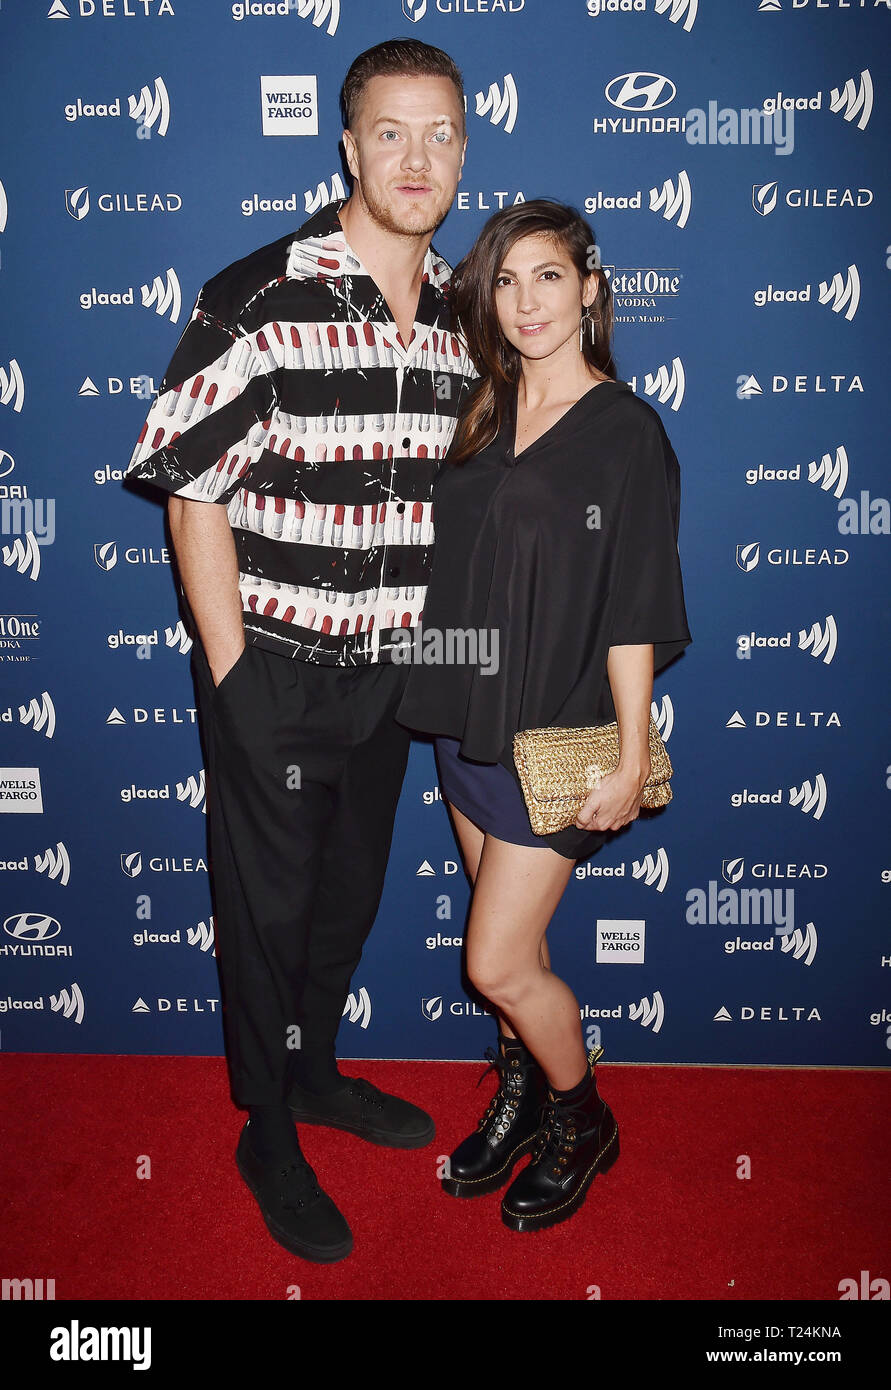 BEVERLY HILLS, CA - MARCH 28: Dan Reynolds (L) and Aja Volkman attend the 30th Annual GLAAD Media Awards at The Beverly Hilton Hotel on March 28, 2019 in Beverly Hills, California. Stock Photo